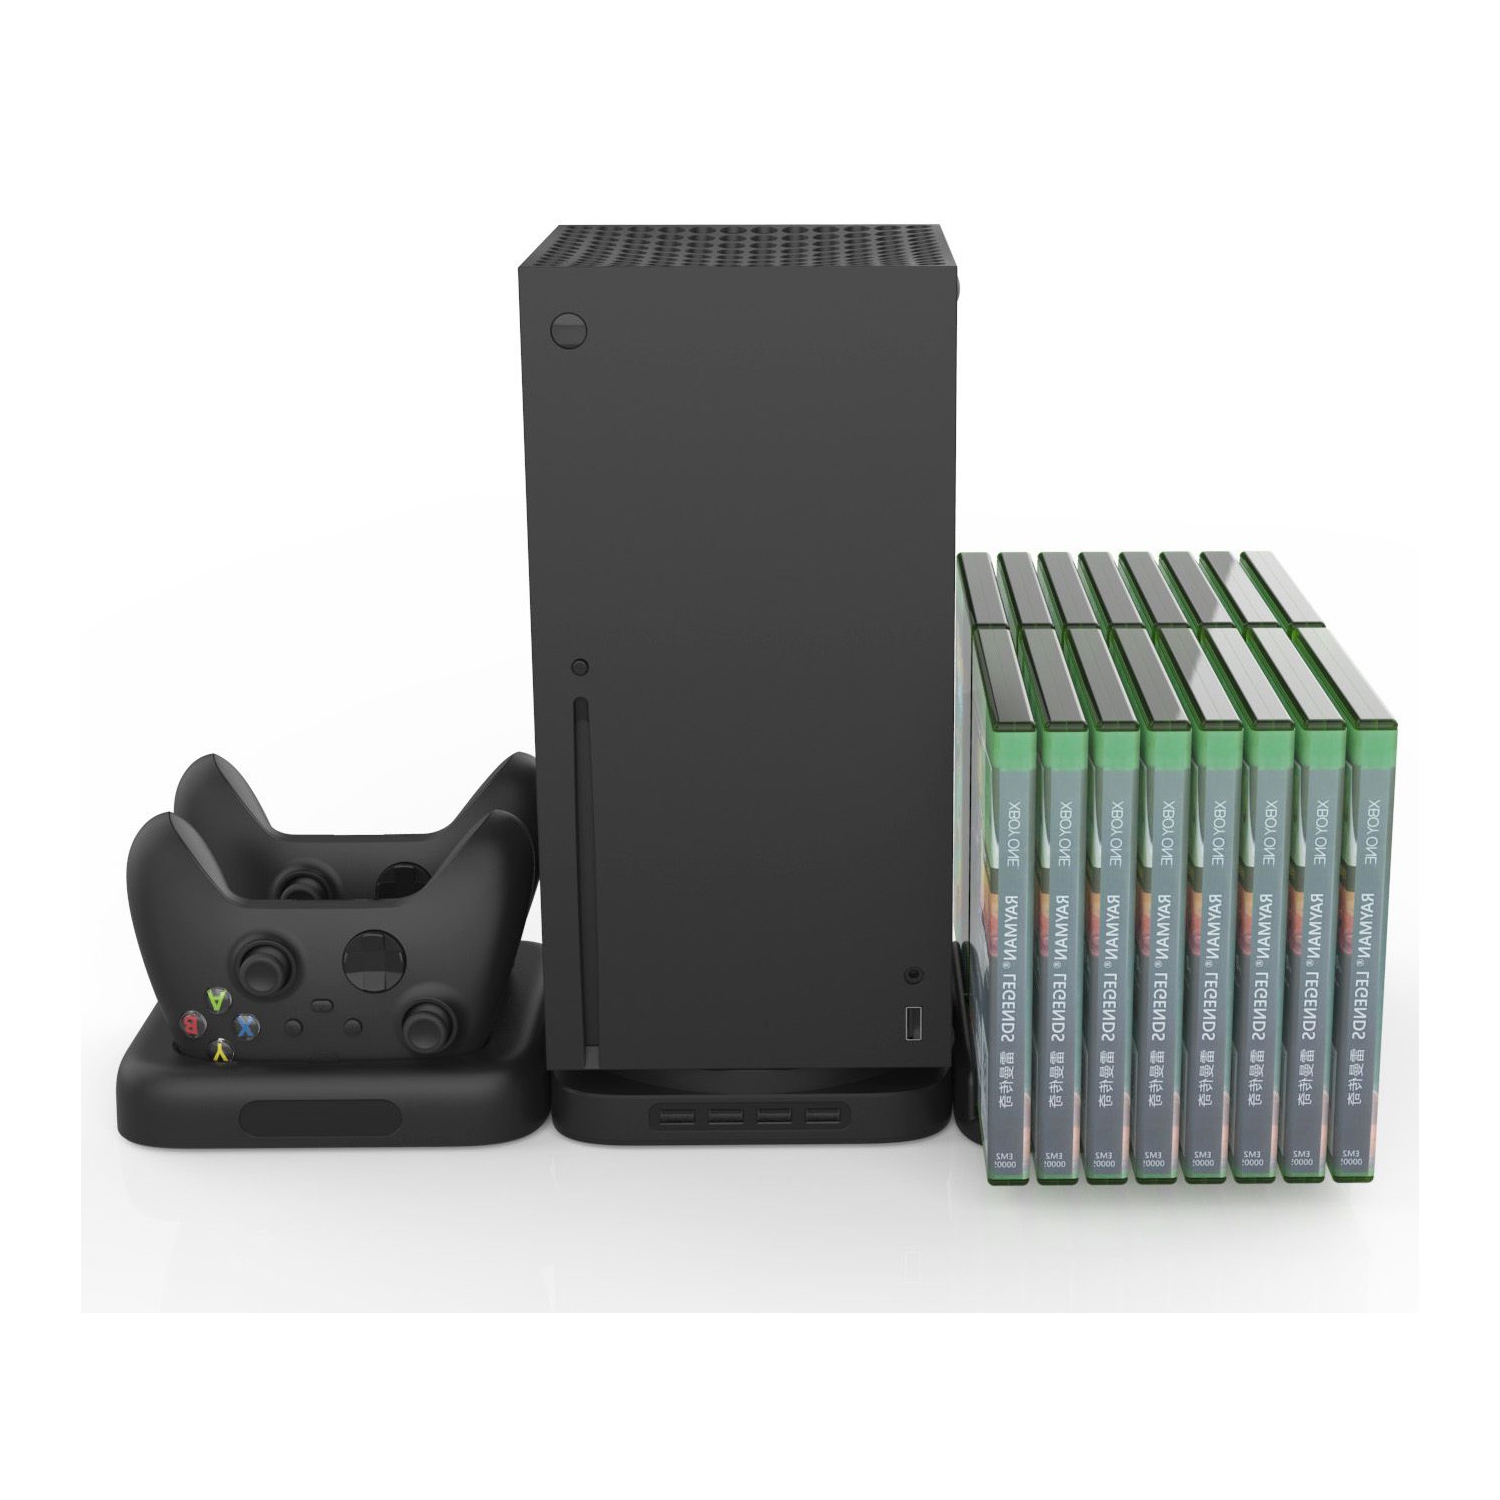 wingomart 3-in-1 Powered Vertical Stand for Xbox Series X - Dual Controller Charger Dock & Discs Storage (Stand includes 4 USB 2.0 Ports)